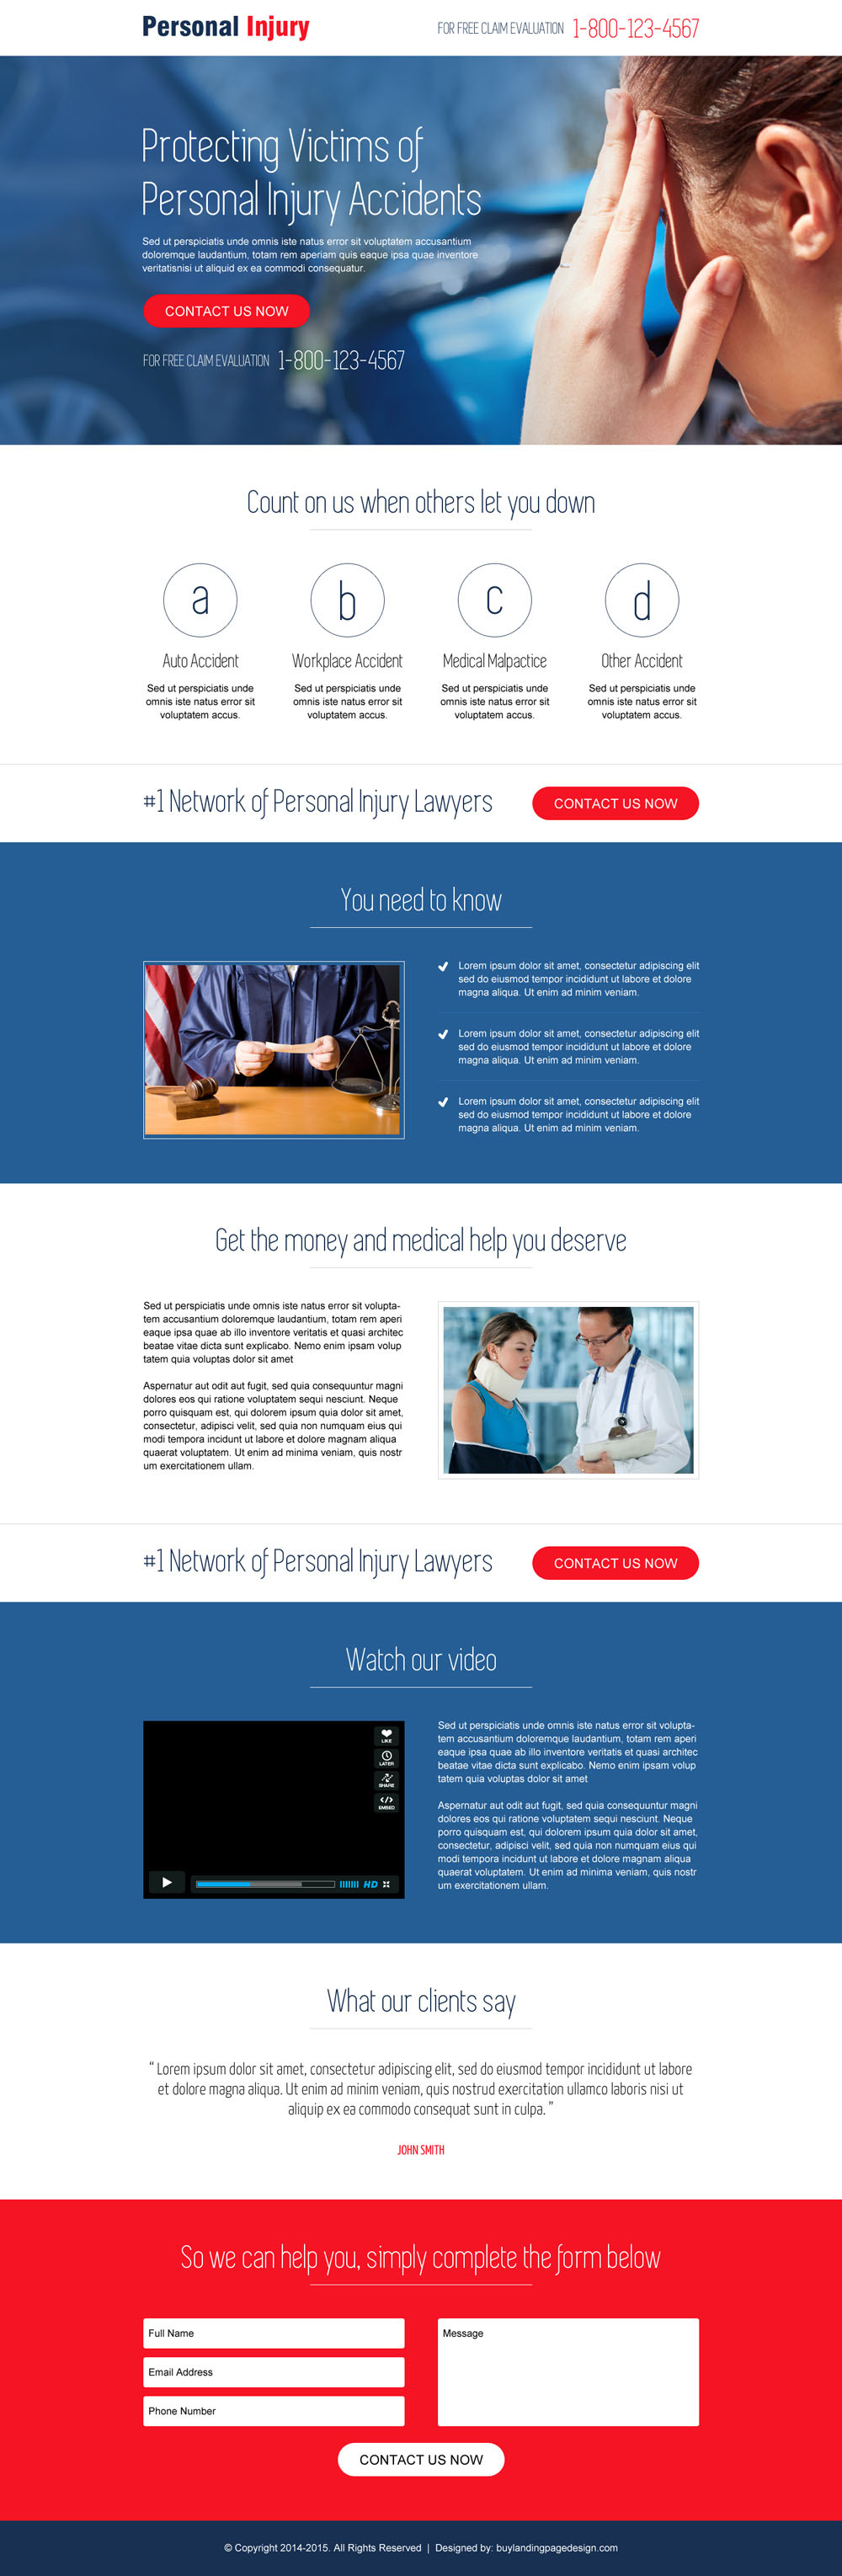 personal-injury-lead-capture-and-call-to-action-landing-page-design-template-001